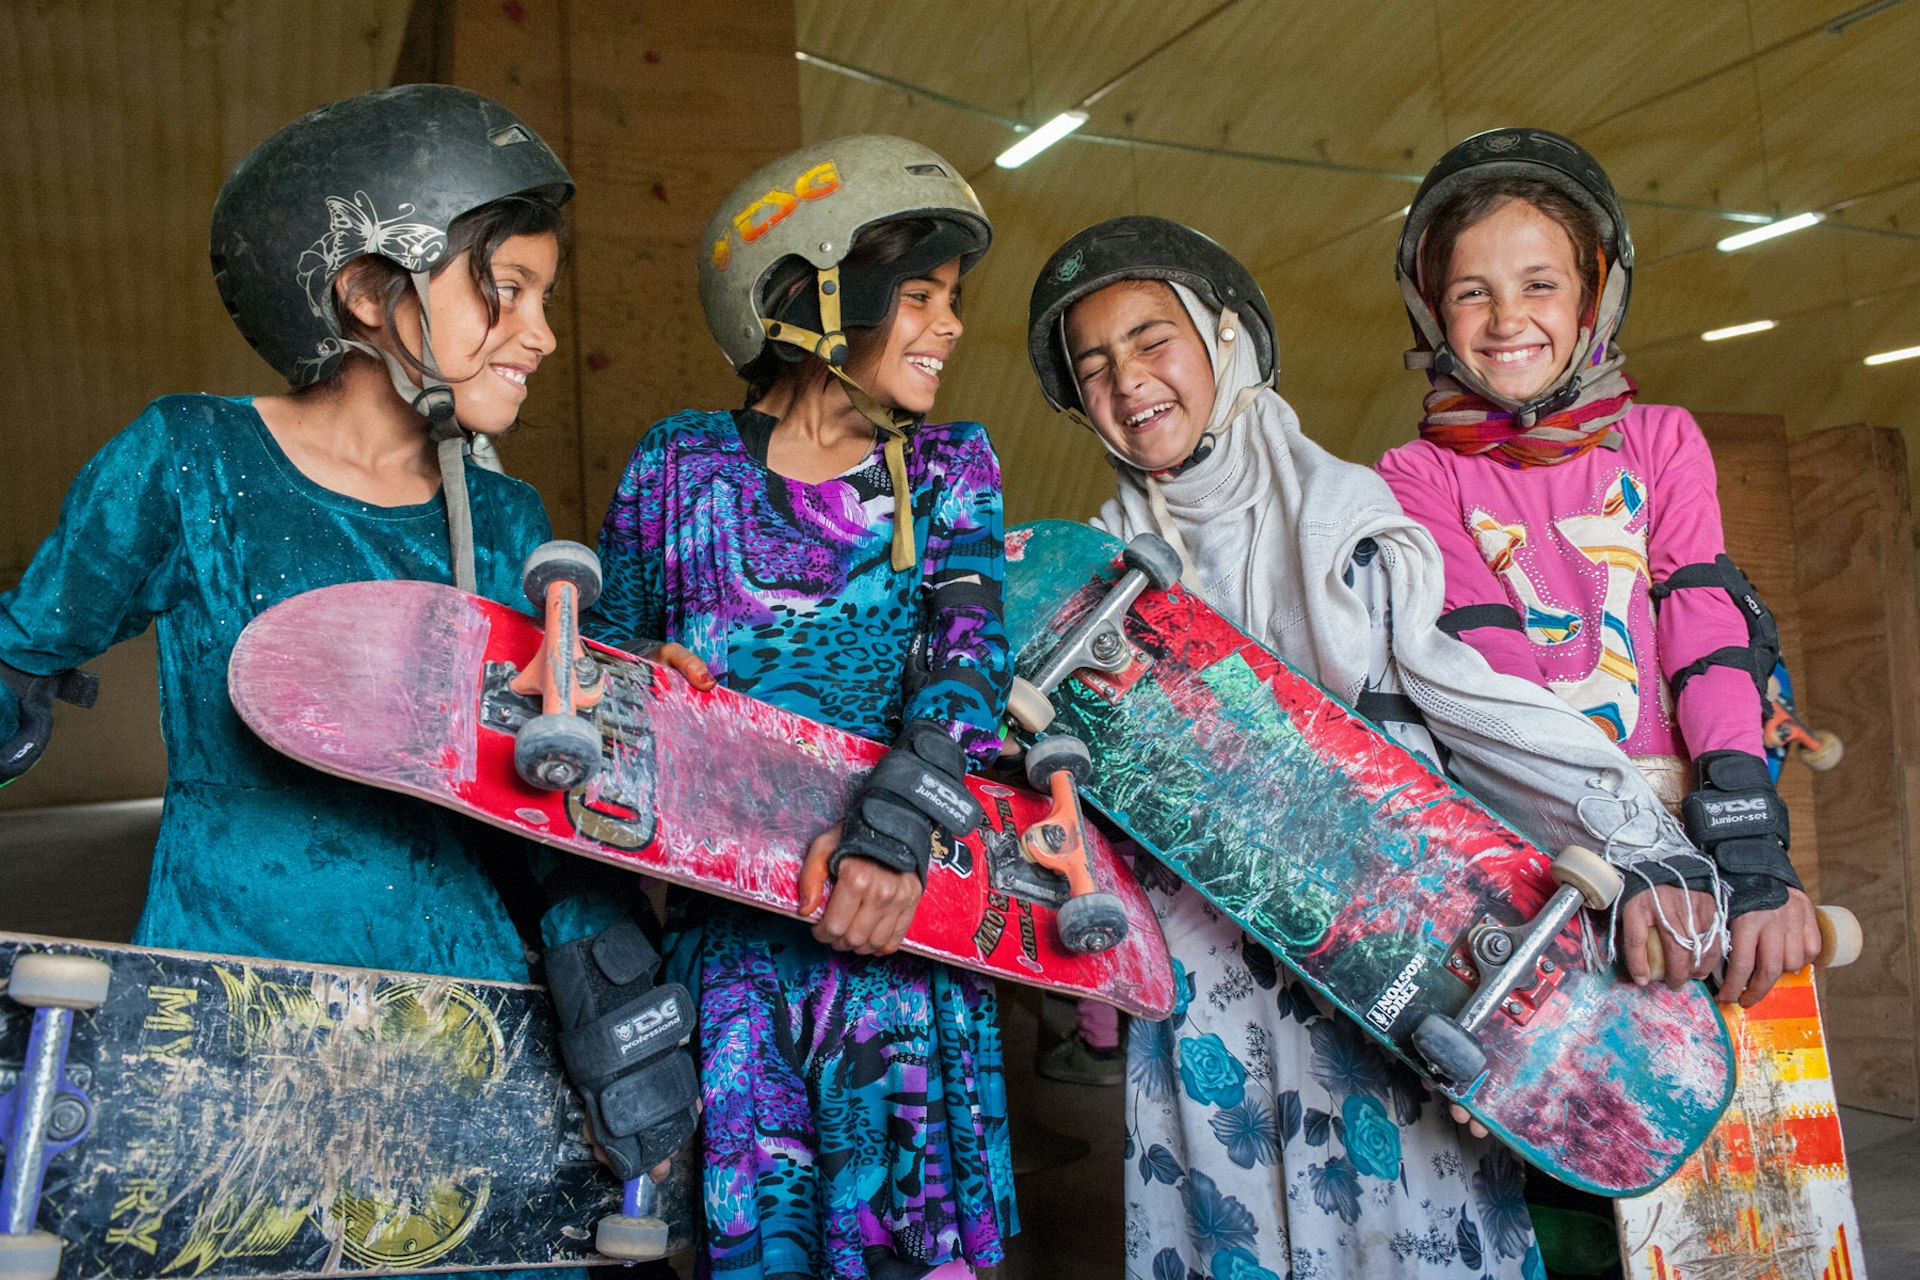 Video: Skateistan's new year's resolution is to bring skateboards to kids everywhere